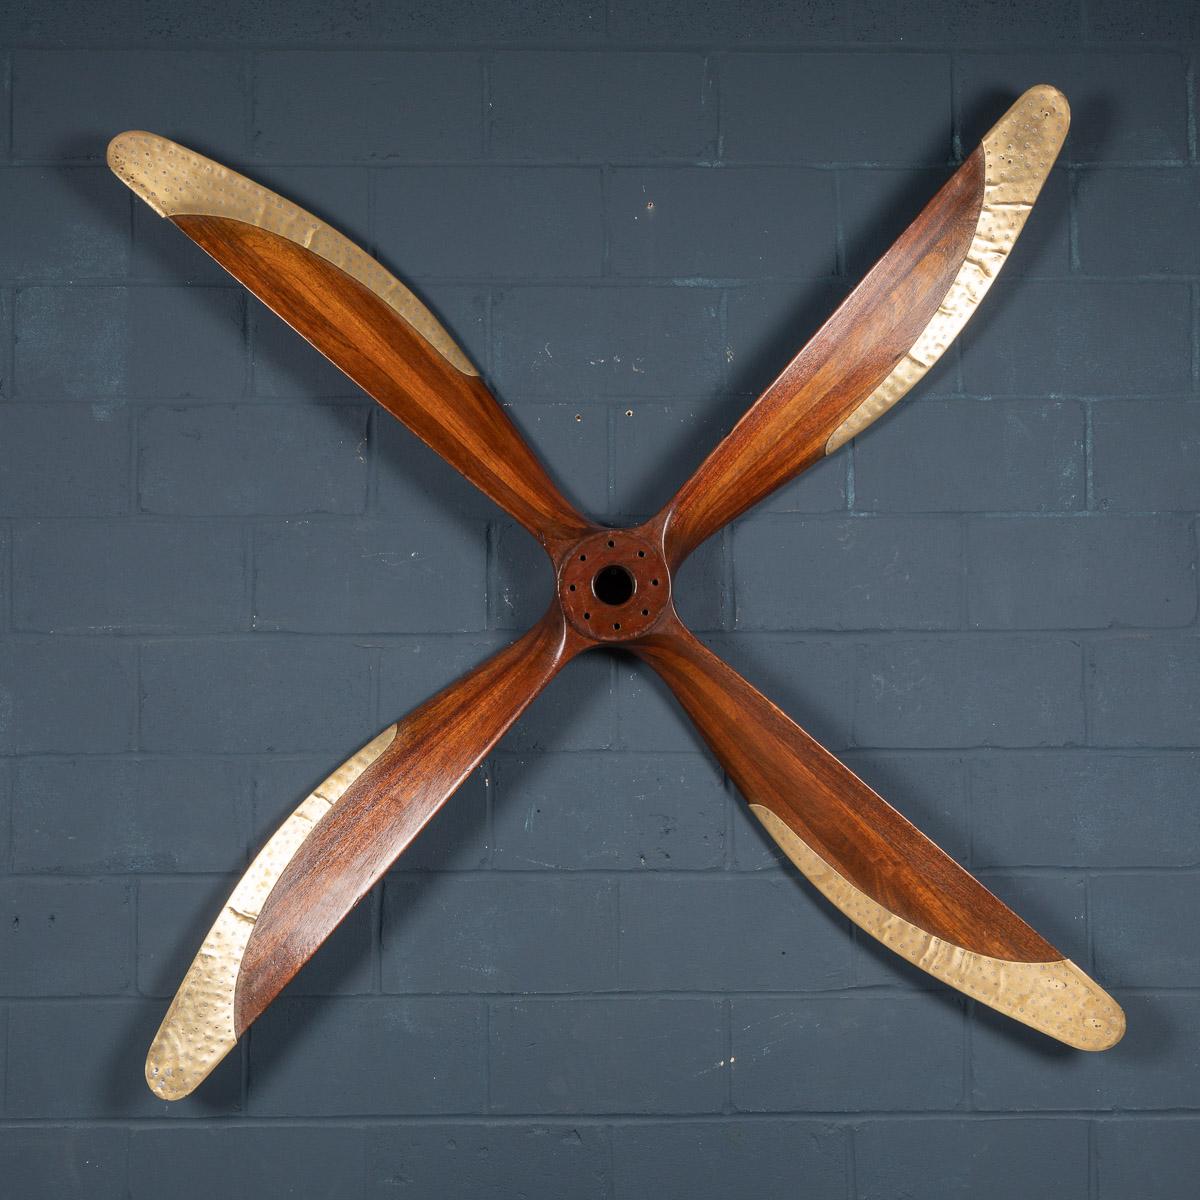 An extremely rare four-blade propeller from an FE8 World War One aircraft. These aircrafts where a single seater fighters, the propellers are mounted to the rear so that the pilots could fire their machine guns mounted to the front of the plane. The